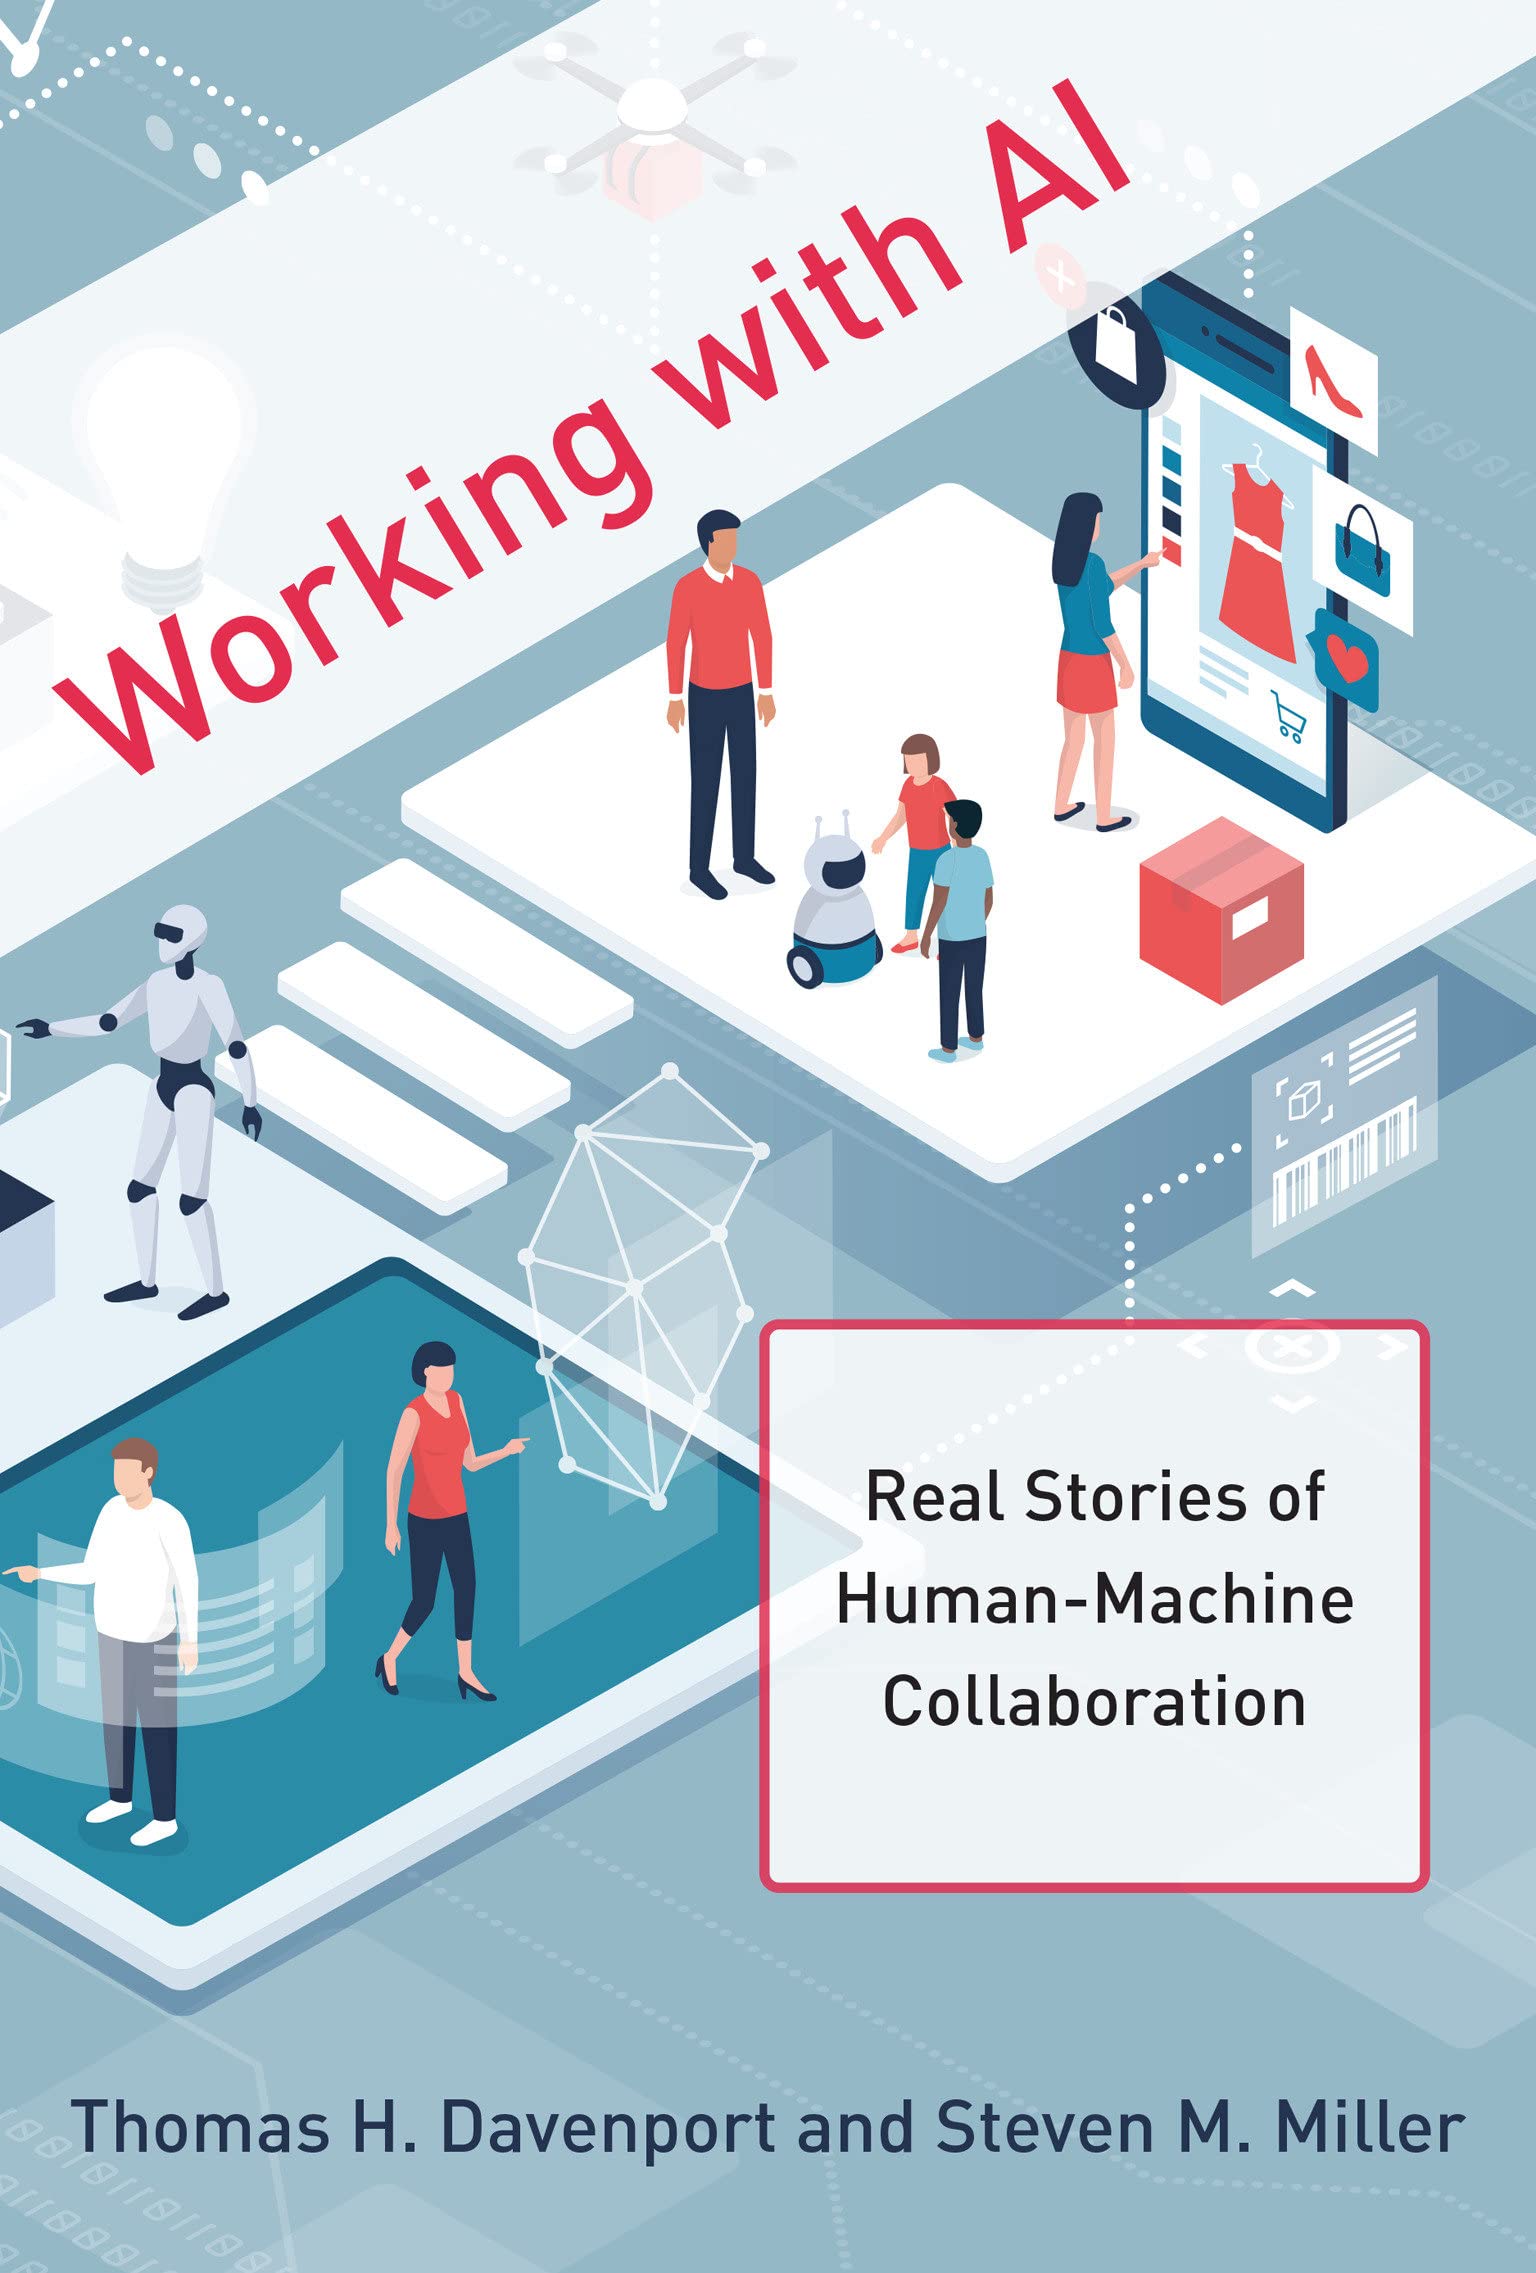 Working with AI: Real Stories of Human-Machine Collaboration by Thomas H. Davenport